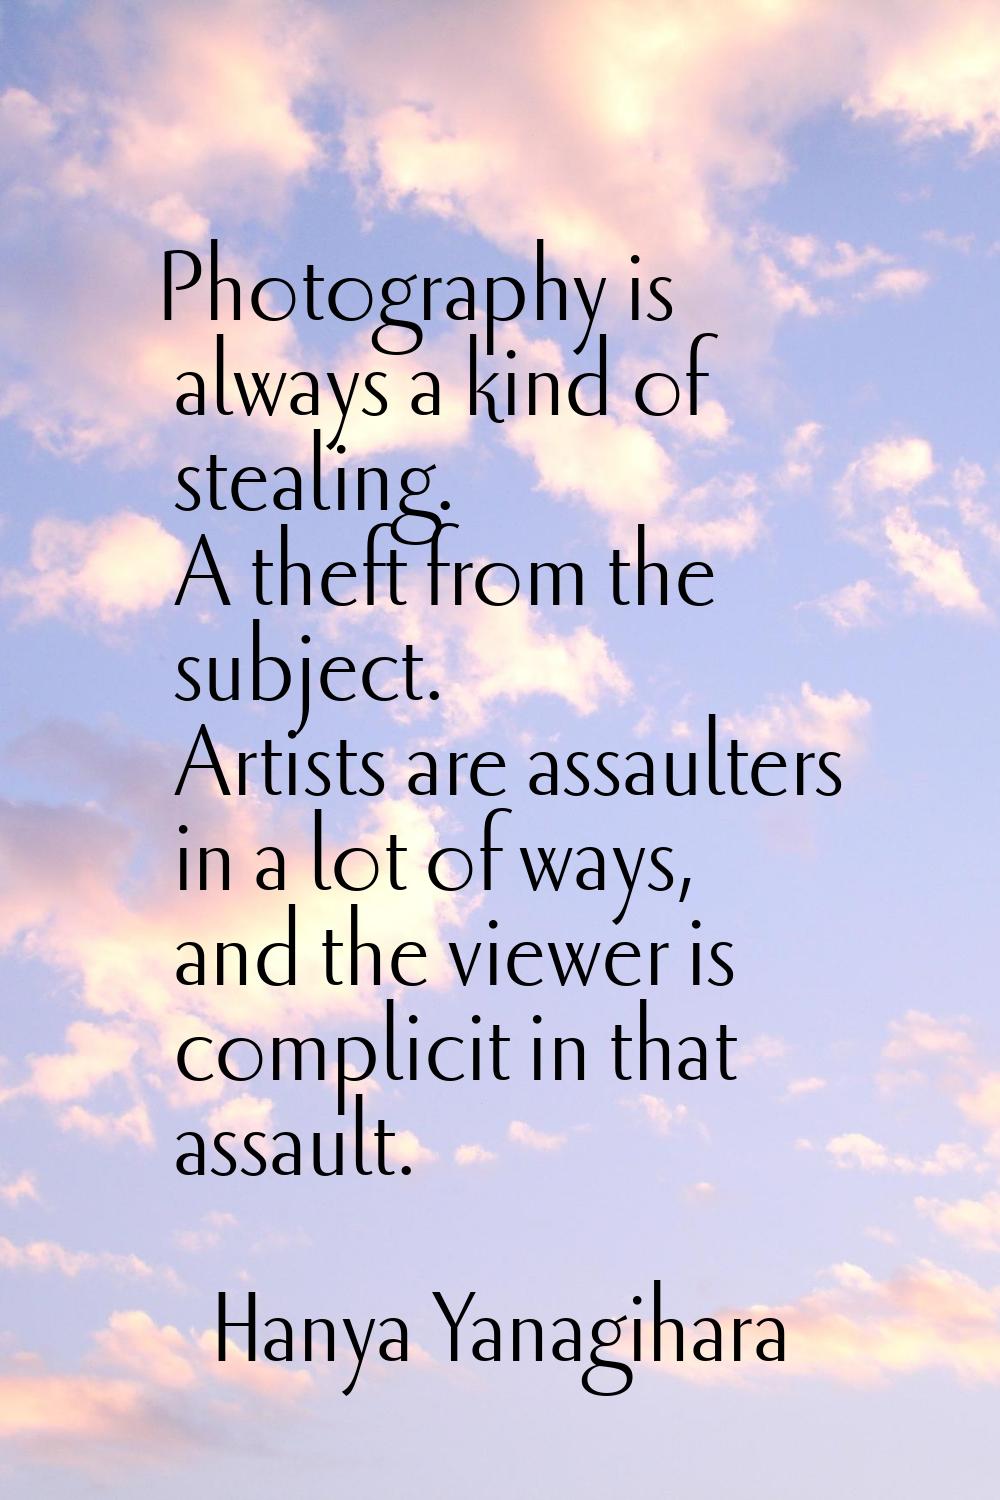 Photography is always a kind of stealing. A theft from the subject. Artists are assaulters in a lot